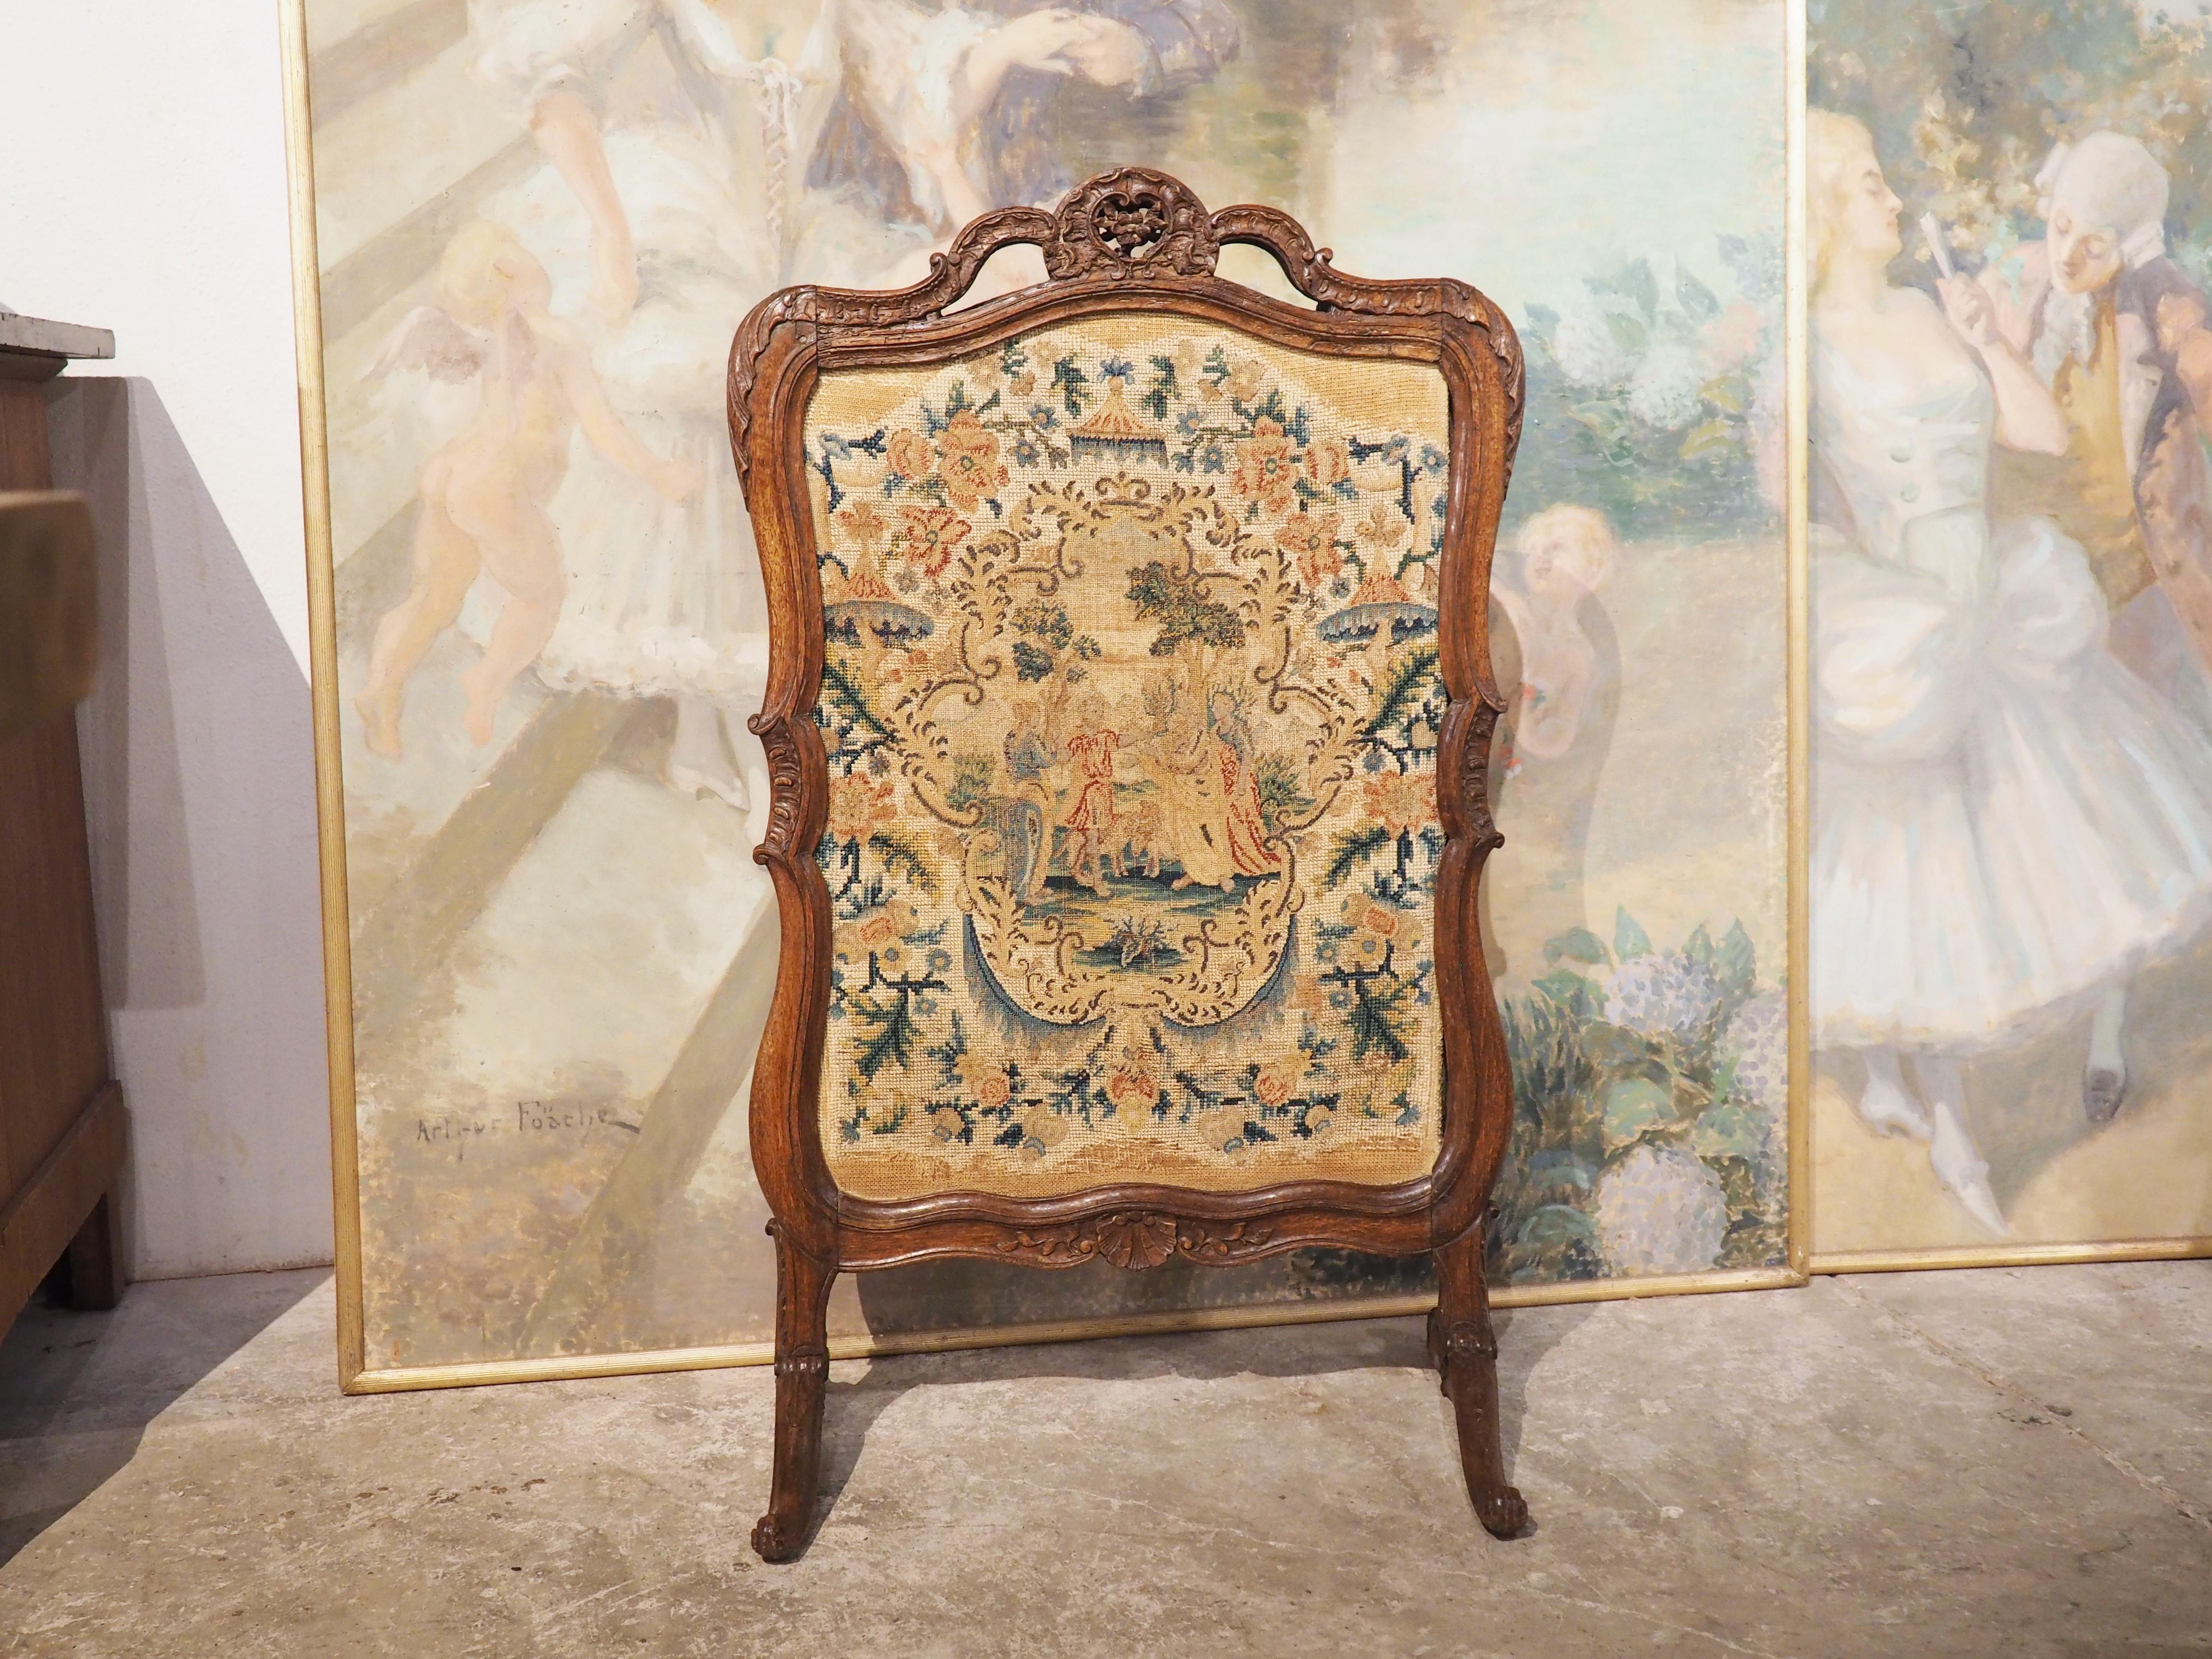 Used during warm months to cover the opening of a fireplace, this French period Regence firescreen with needlepoint inset is from circa 1720. The hand-carved wood frame has motifs in the Regence style, such as the scalloped shell on the bottom that